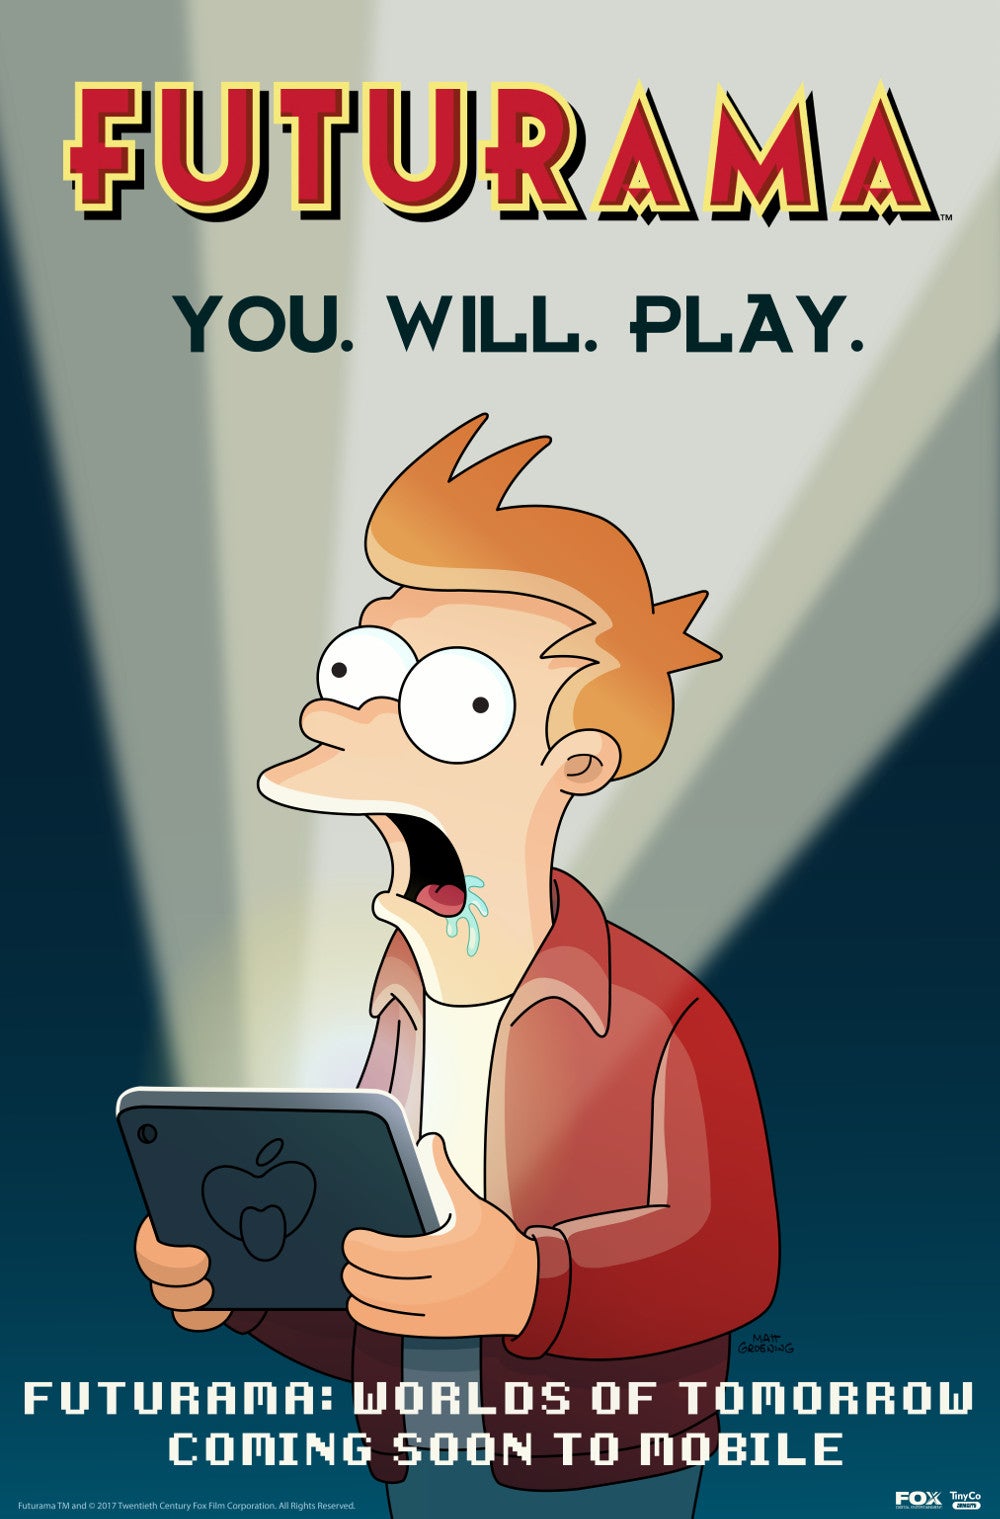 Futurama game World of Tomorrow coming soon to mobile devices